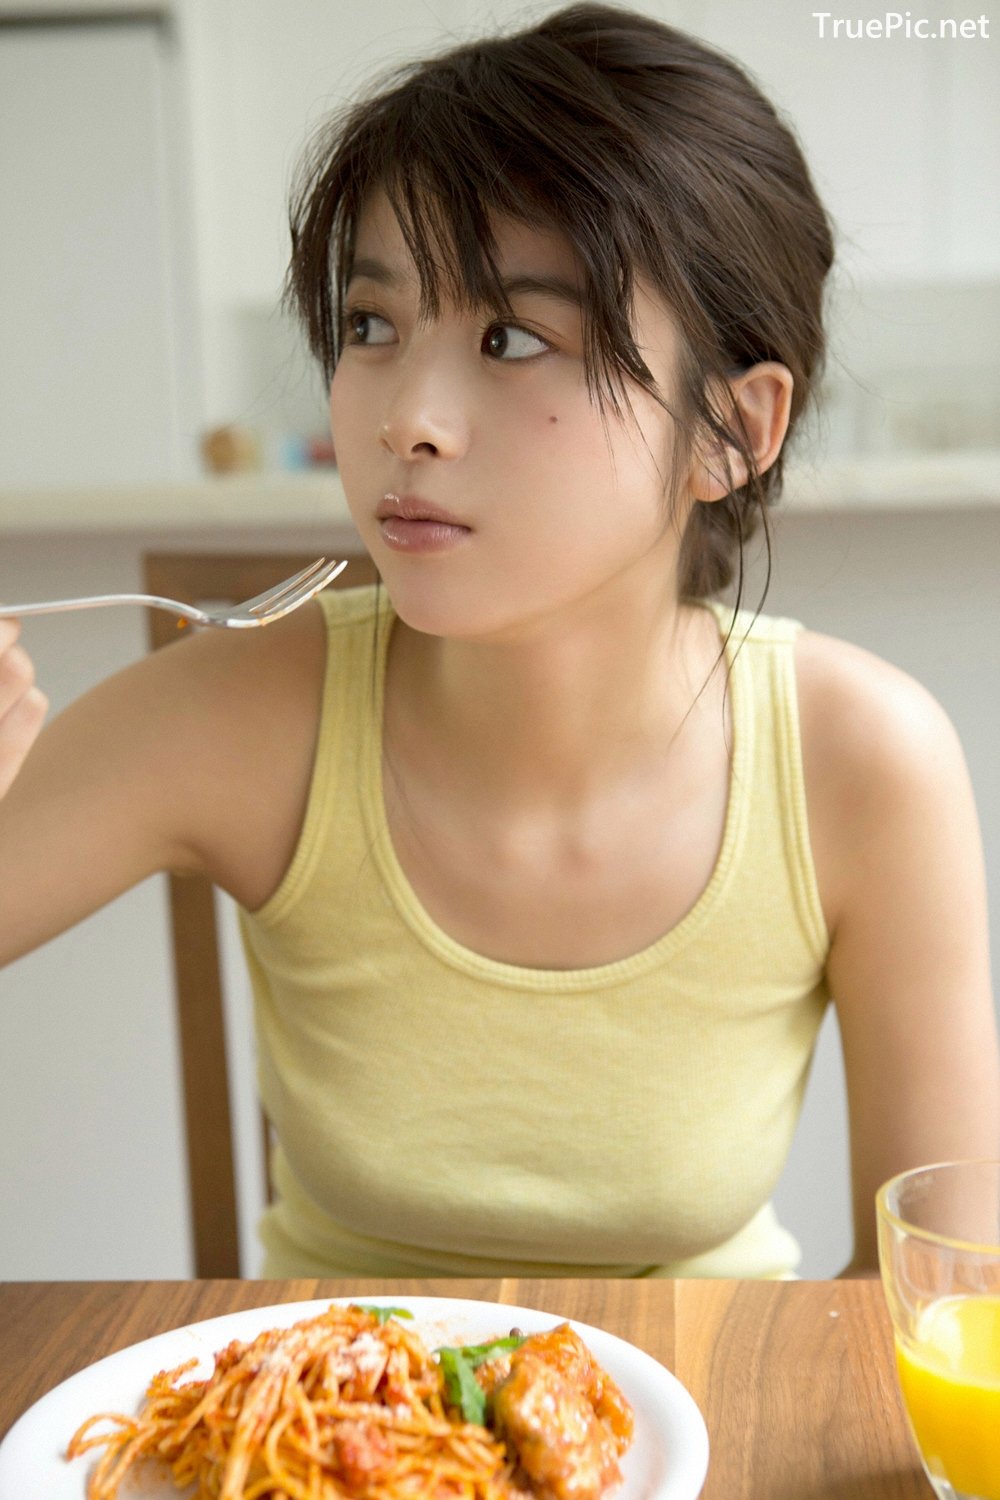 Japanese Actress And Model - Fumika Baba - YS Web Vol.729 - TruePic.net - Picture-13